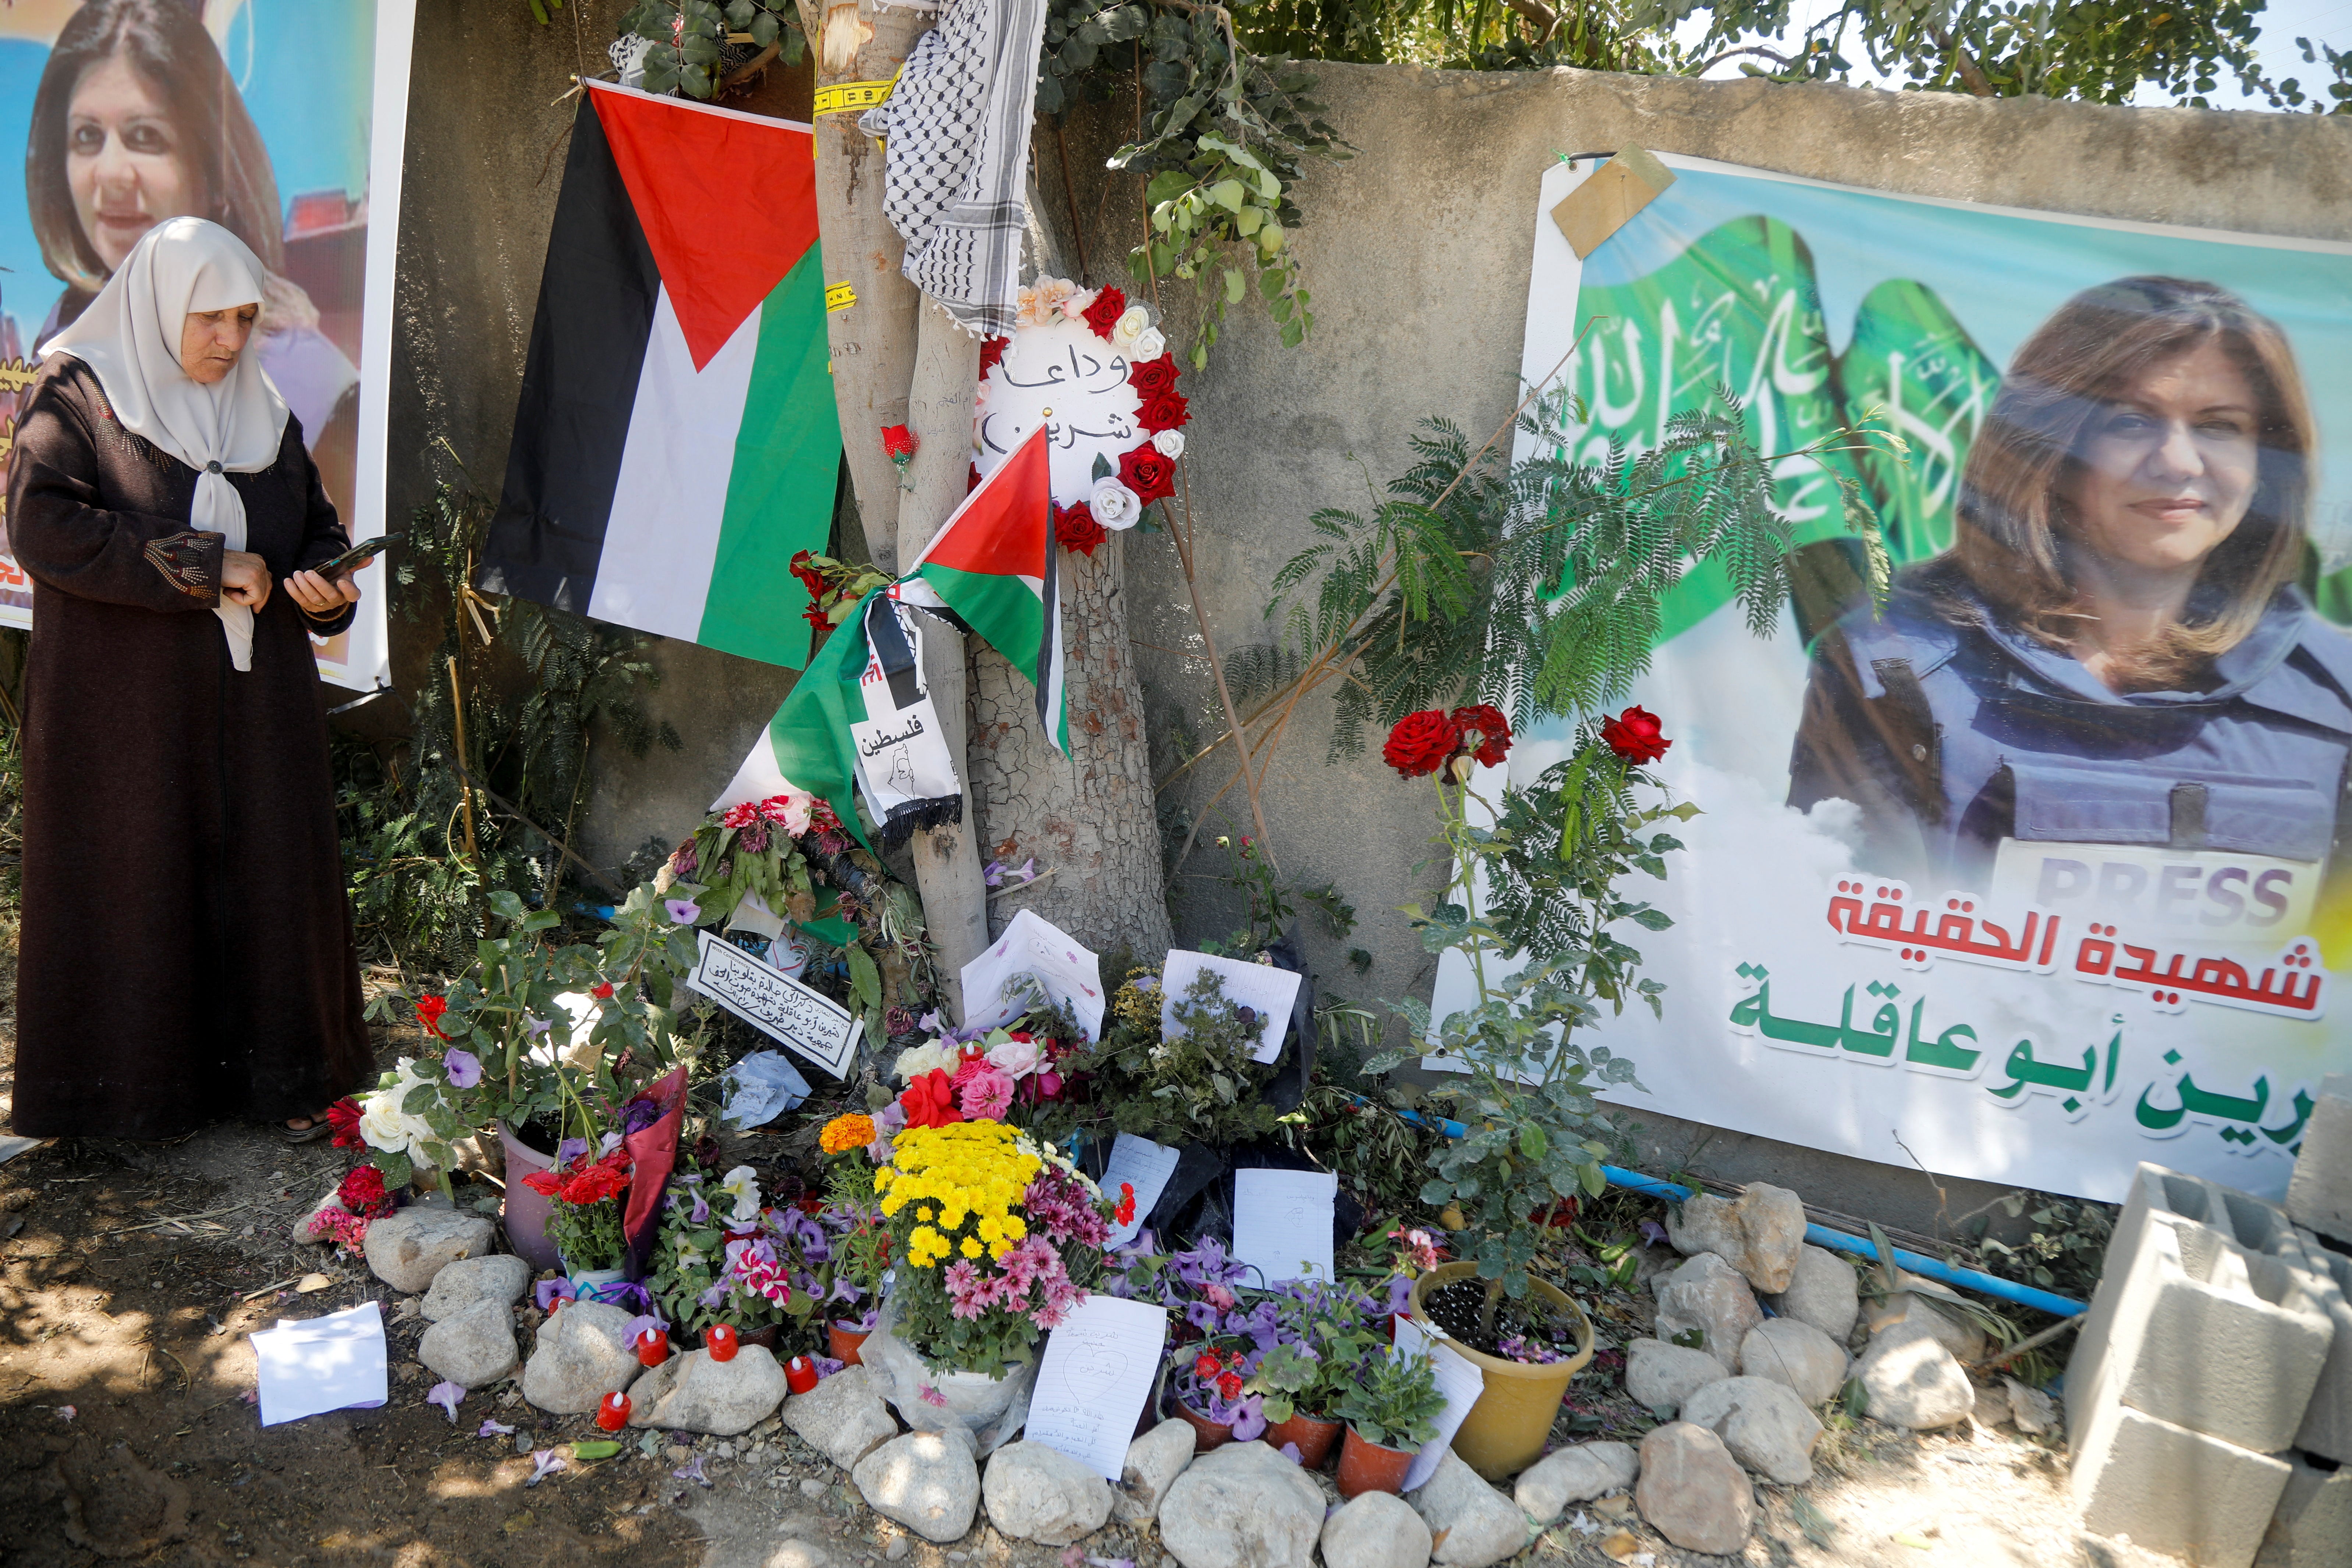 Initially, Israeli officials flatly denied being responsible for Shireen’s death and blamed Palestinian gunmen